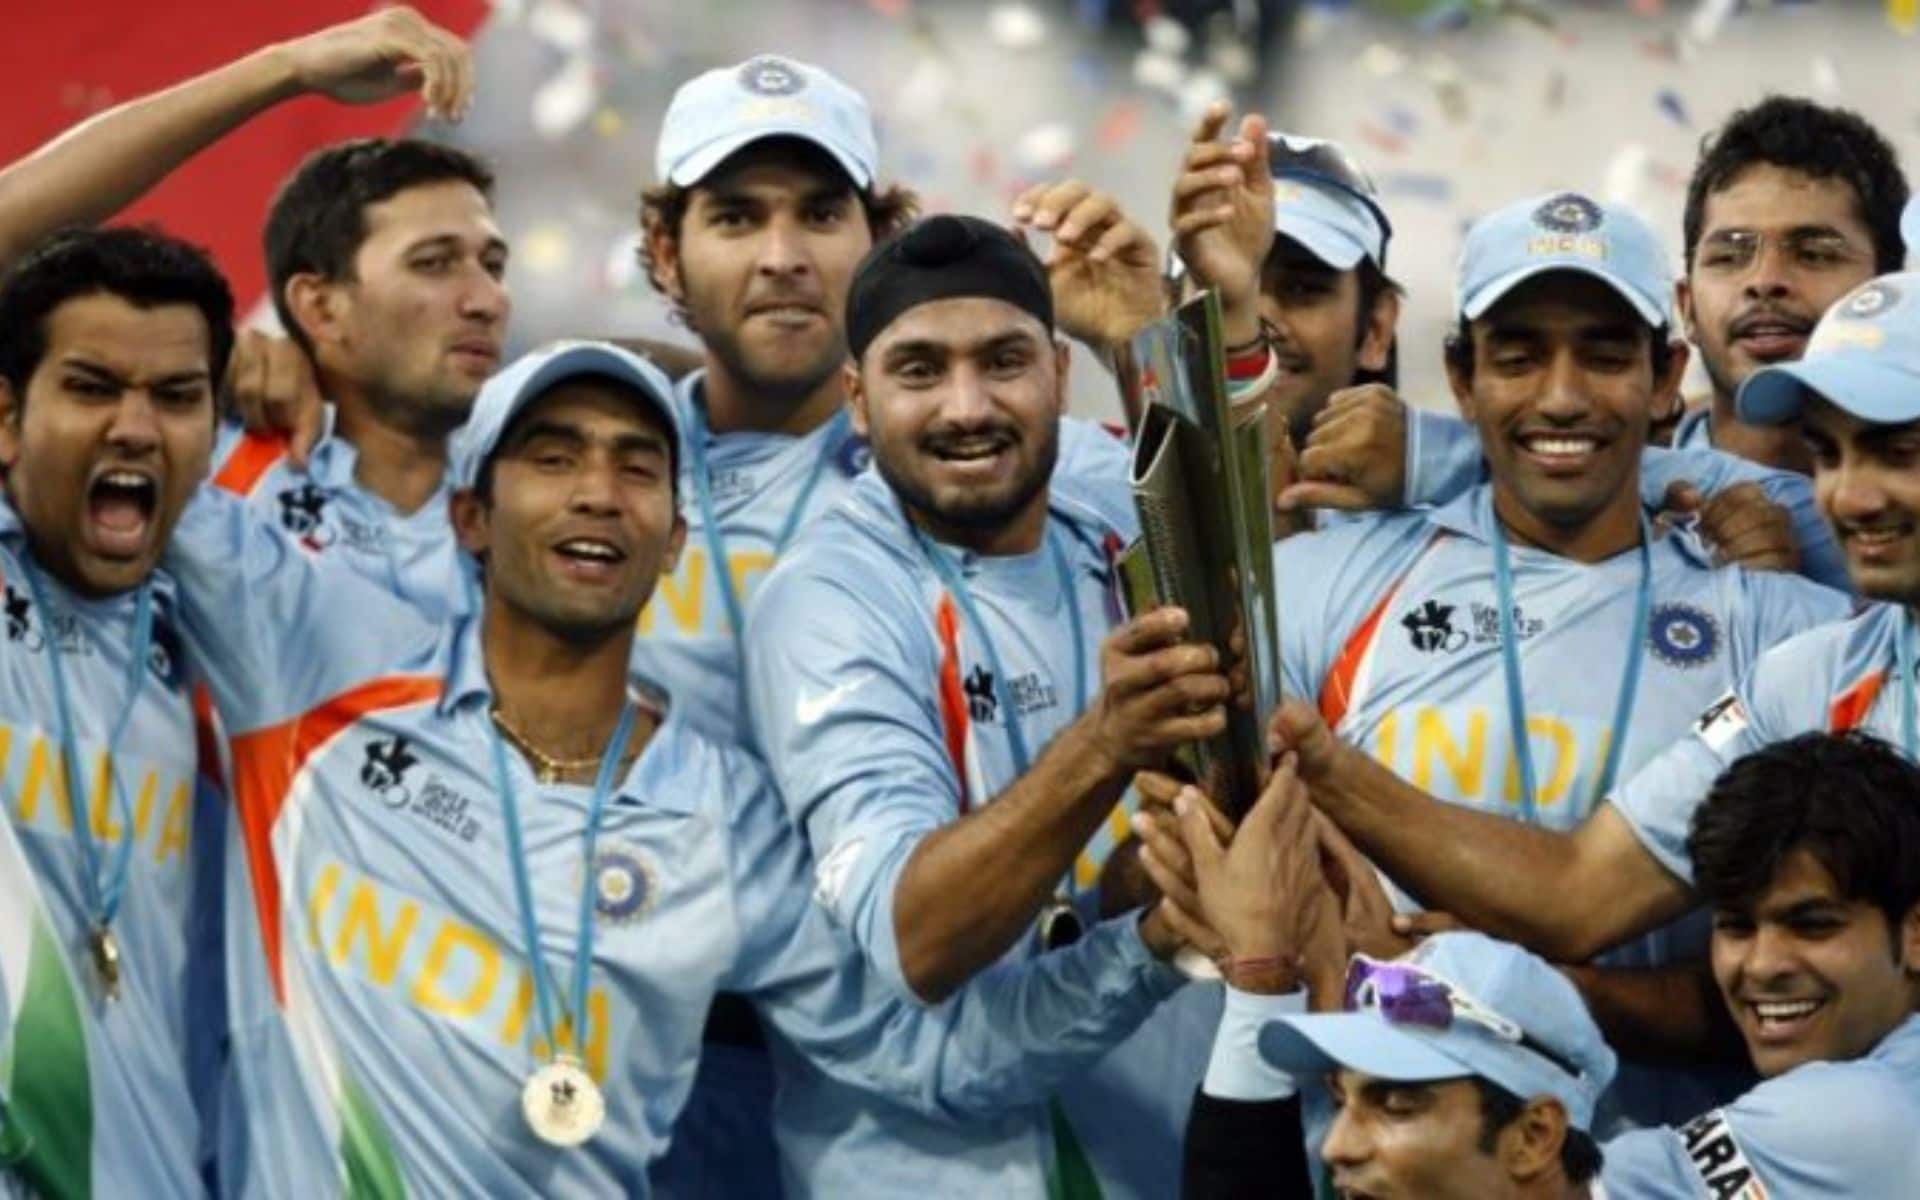 MS Dhoni led India won the first T20 World Cup in 2007 [X.com]